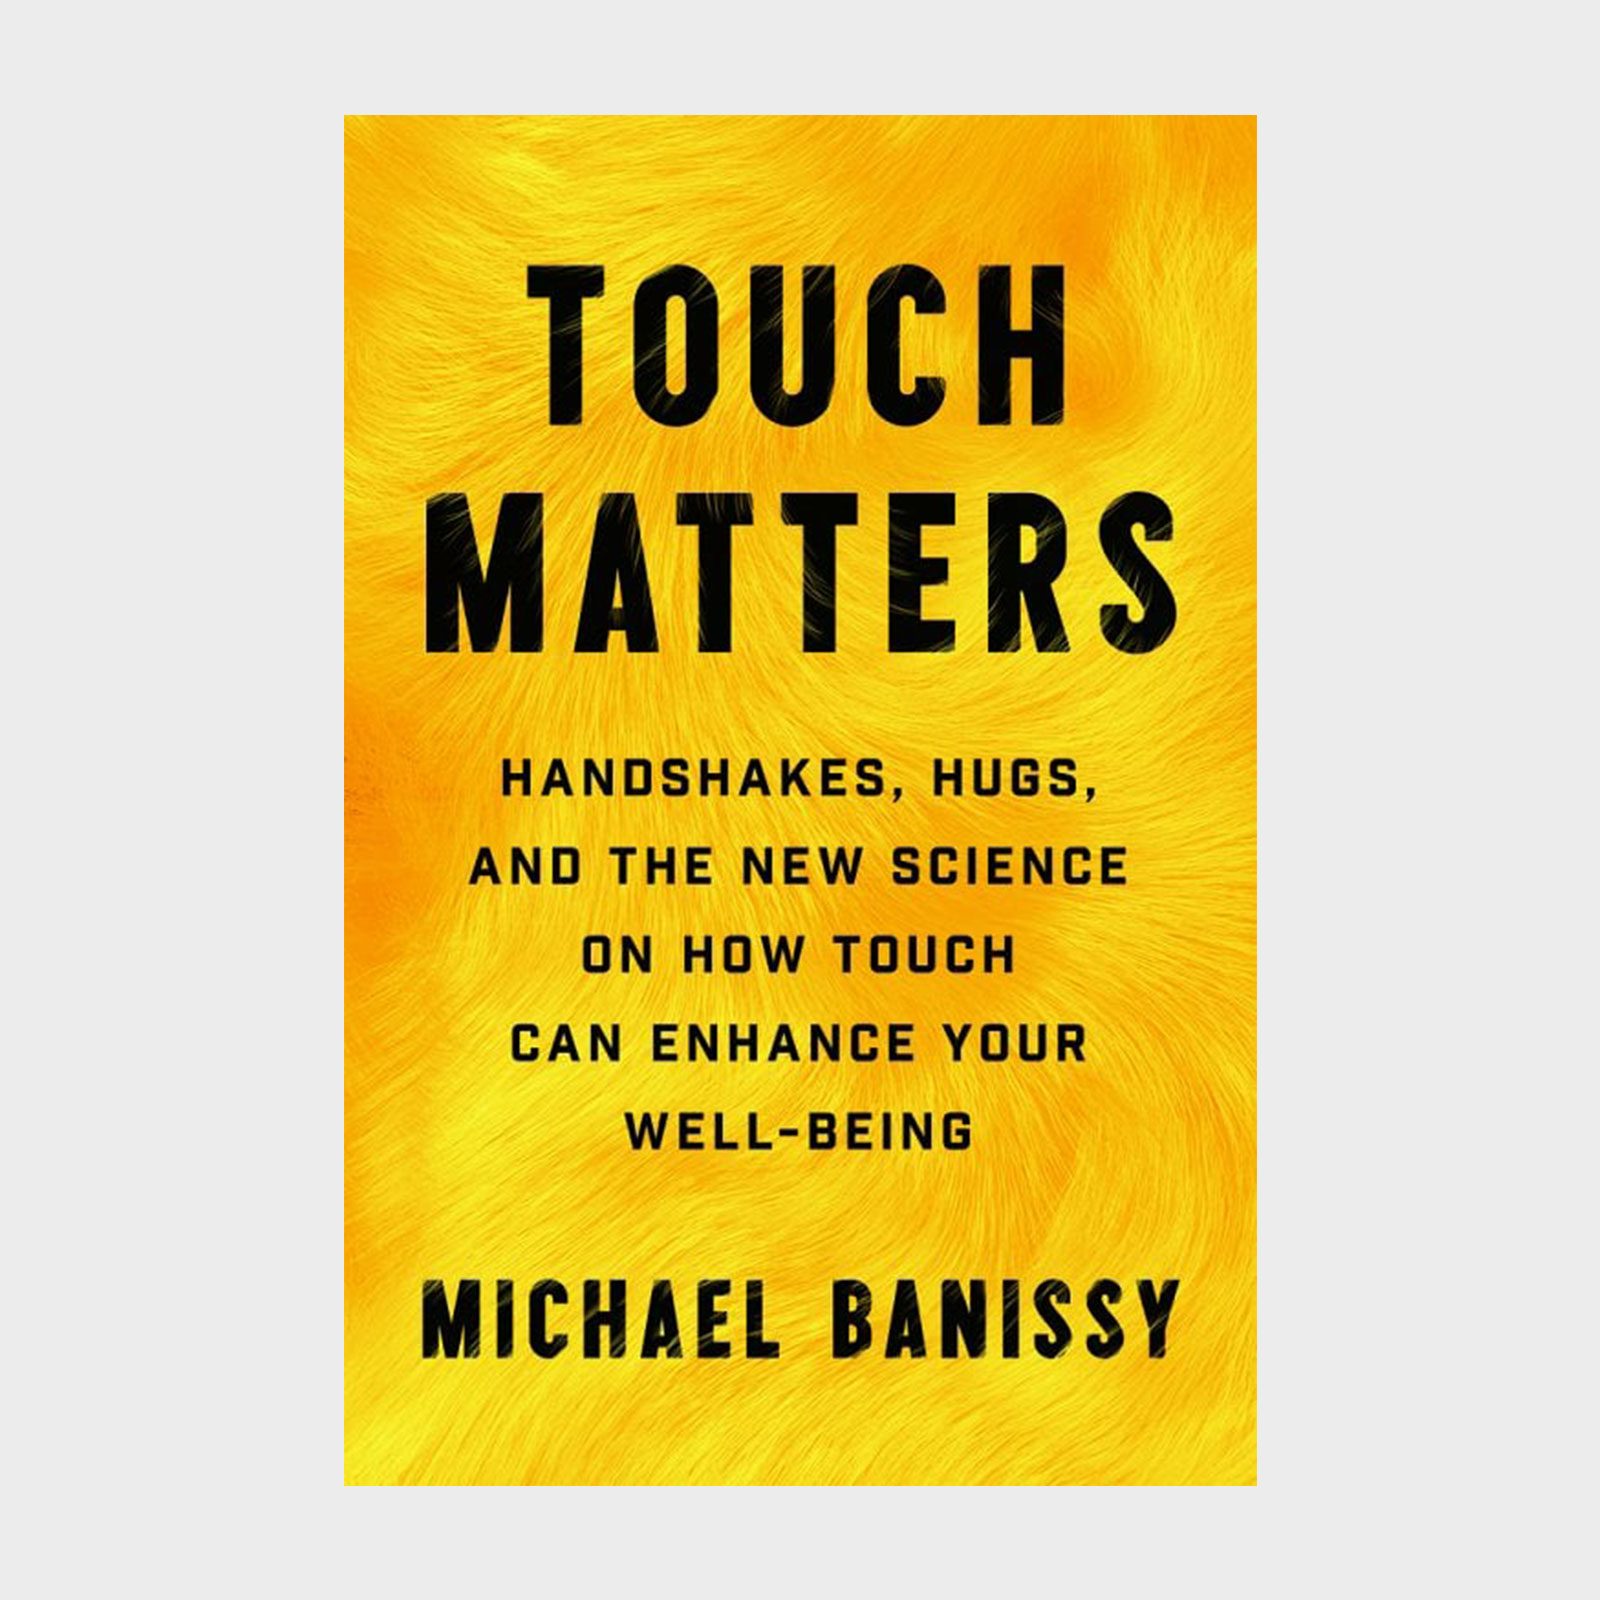 <p>Michael Banissy's 2023 book <a href="https://bookshop.org/p/books/touch-matters-handshakes-hugs-high-fives-and-the-new-science-on-how-touch-can-enhance-your-well-being-michael-banissy/18820890?ean=9781797221441" rel="noopener"><em>Touch Matters: Handshakes, Hugs, and the New Science on How Touch Can Enhance Your Well-Being</em></a> examines how vital the sense of touch is to our health and relationships. As an award-winning social neuroscience professor, Banissy uses one of the largest studies on touch to help readers enhance their self-esteem, find their "touch personalities" and harness the role it plays in friendships, professional settings, personal settings and more. Just like the effects of exercise on our emotions, our senses and the environments in which we live impact every ounce of our well-being.</p> <p class="listicle-page__cta-button-shop"><a class="shop-btn" href="https://bookshop.org/p/books/touch-matters-handshakes-hugs-high-fives-and-the-new-science-on-how-touch-can-enhance-your-well-being-michael-banissy/18820890?ean=9781797221441">Shop Now</a></p>